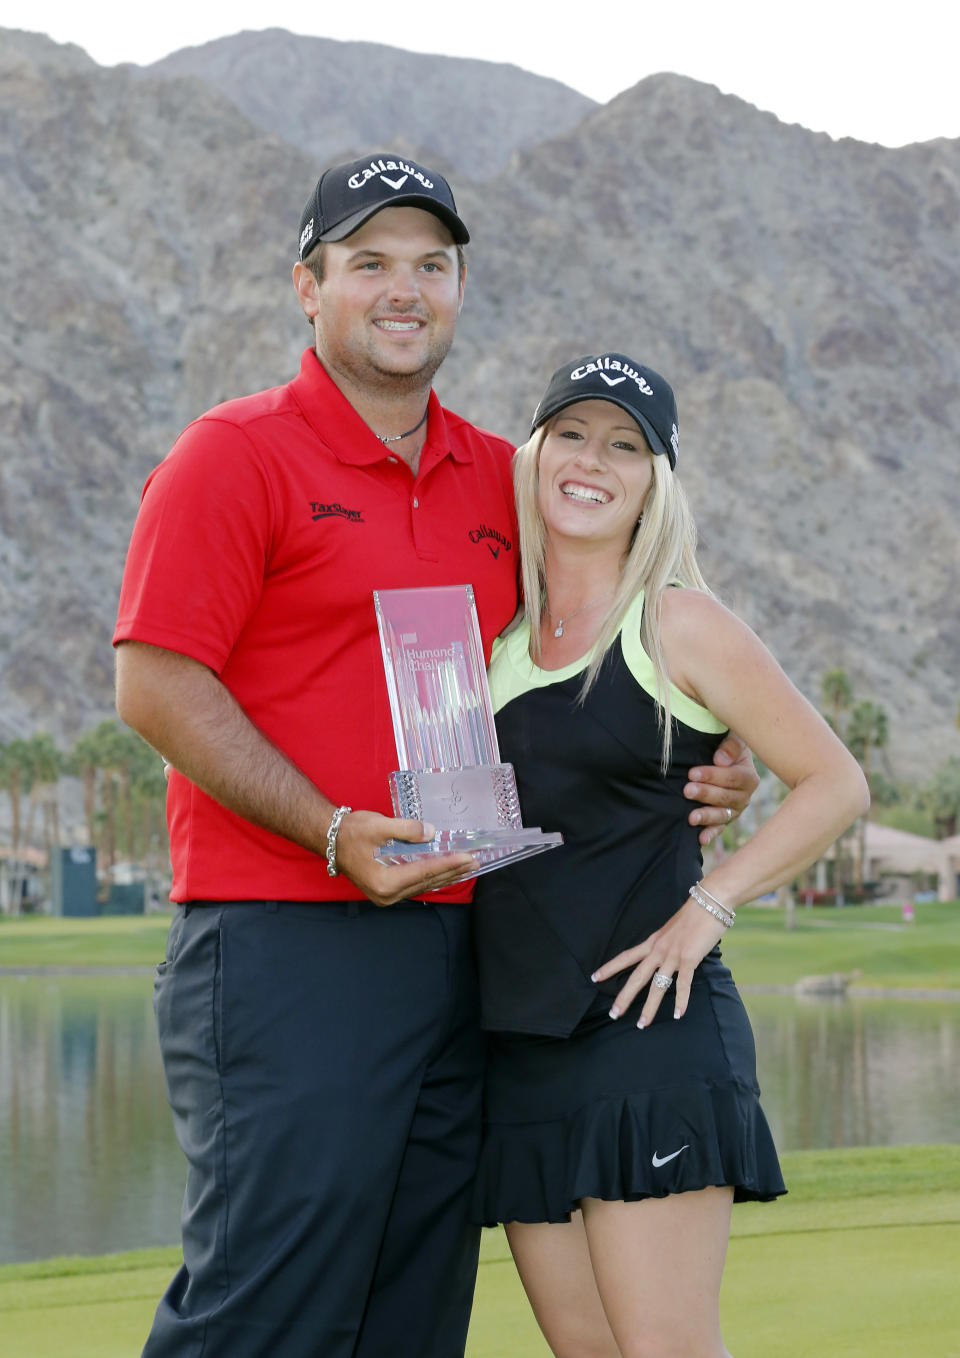 Patrick Reed, left, and wife Justine Reed pose with the trophy after the final round of the Humana Challenge PGA golf tournament on the Palmer Private course at PGA West, Sunday, Jan. 19, 2014, in La Quinta, Calif. (AP Photo/Matt York)